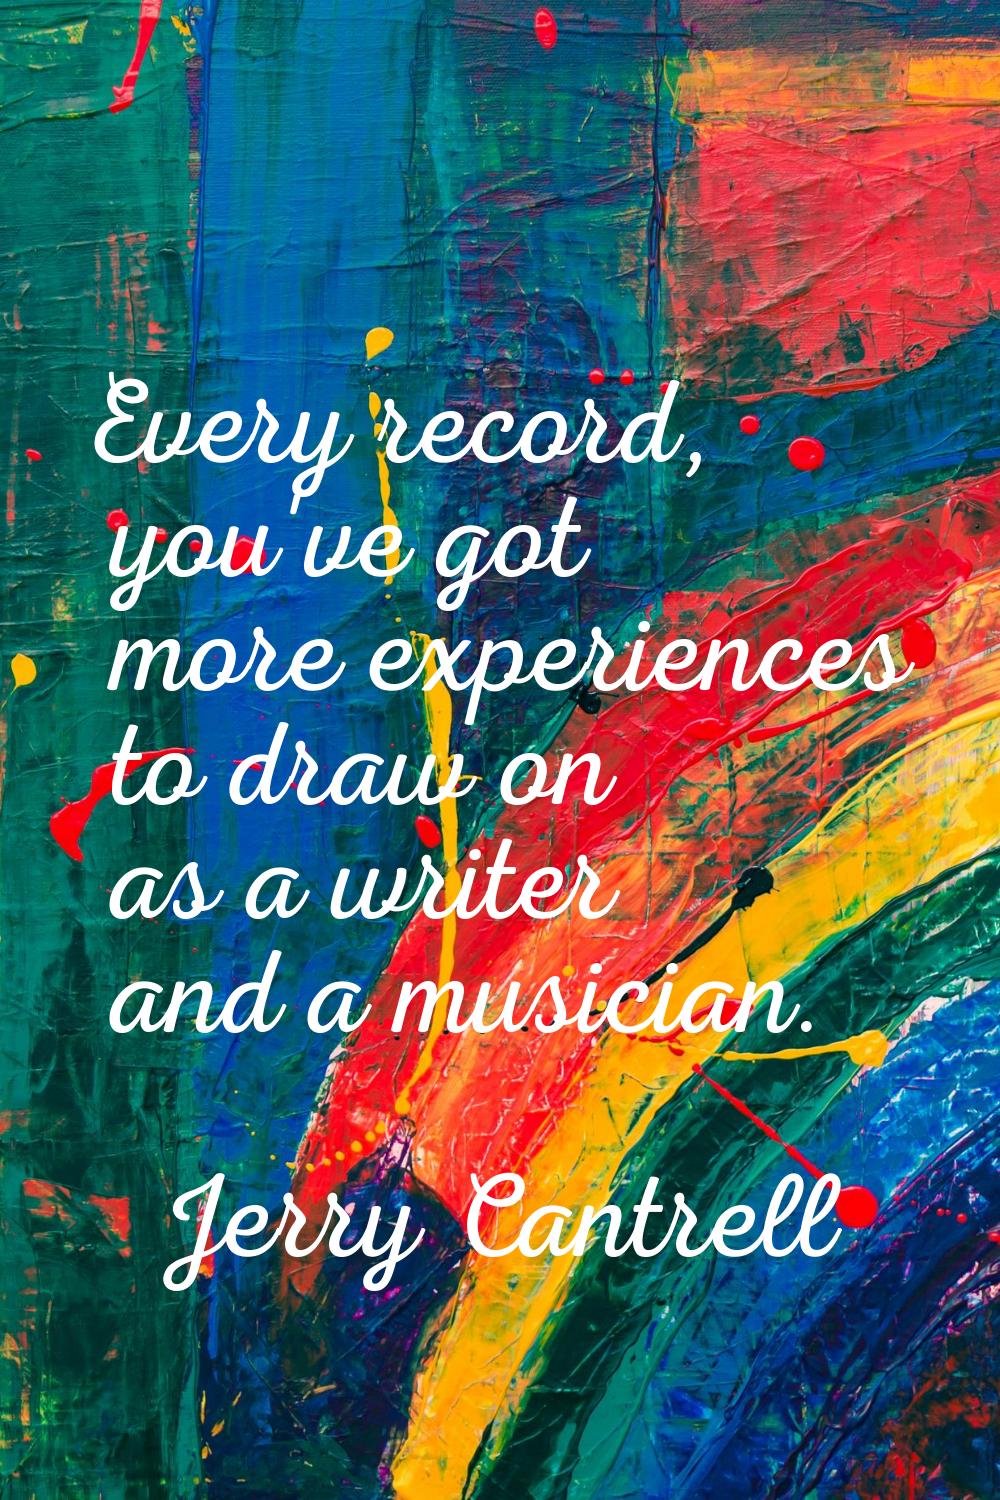 Every record, you've got more experiences to draw on as a writer and a musician.